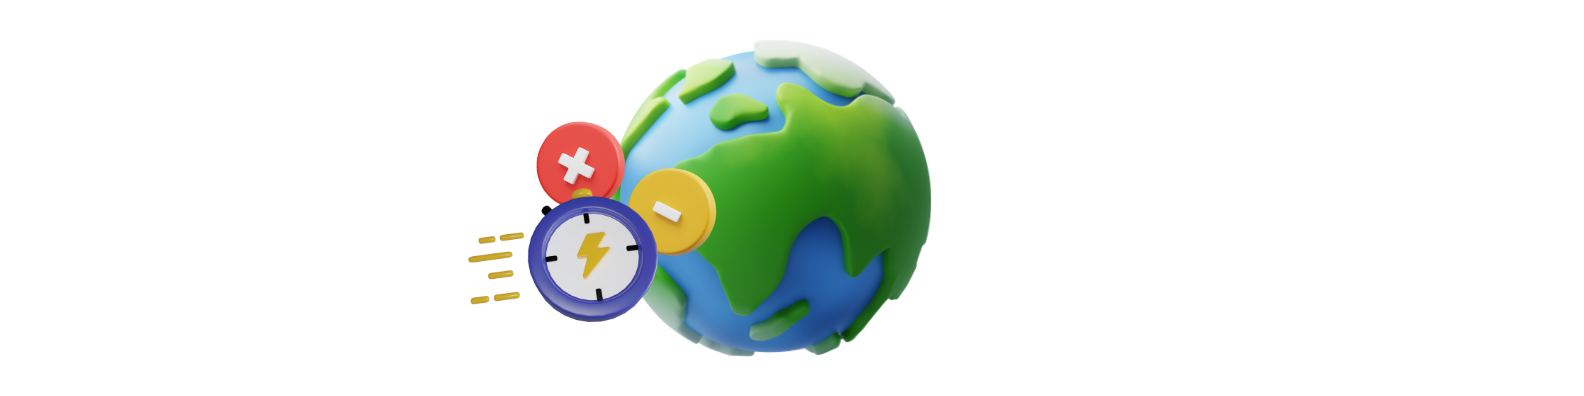 globe and time converter icon 